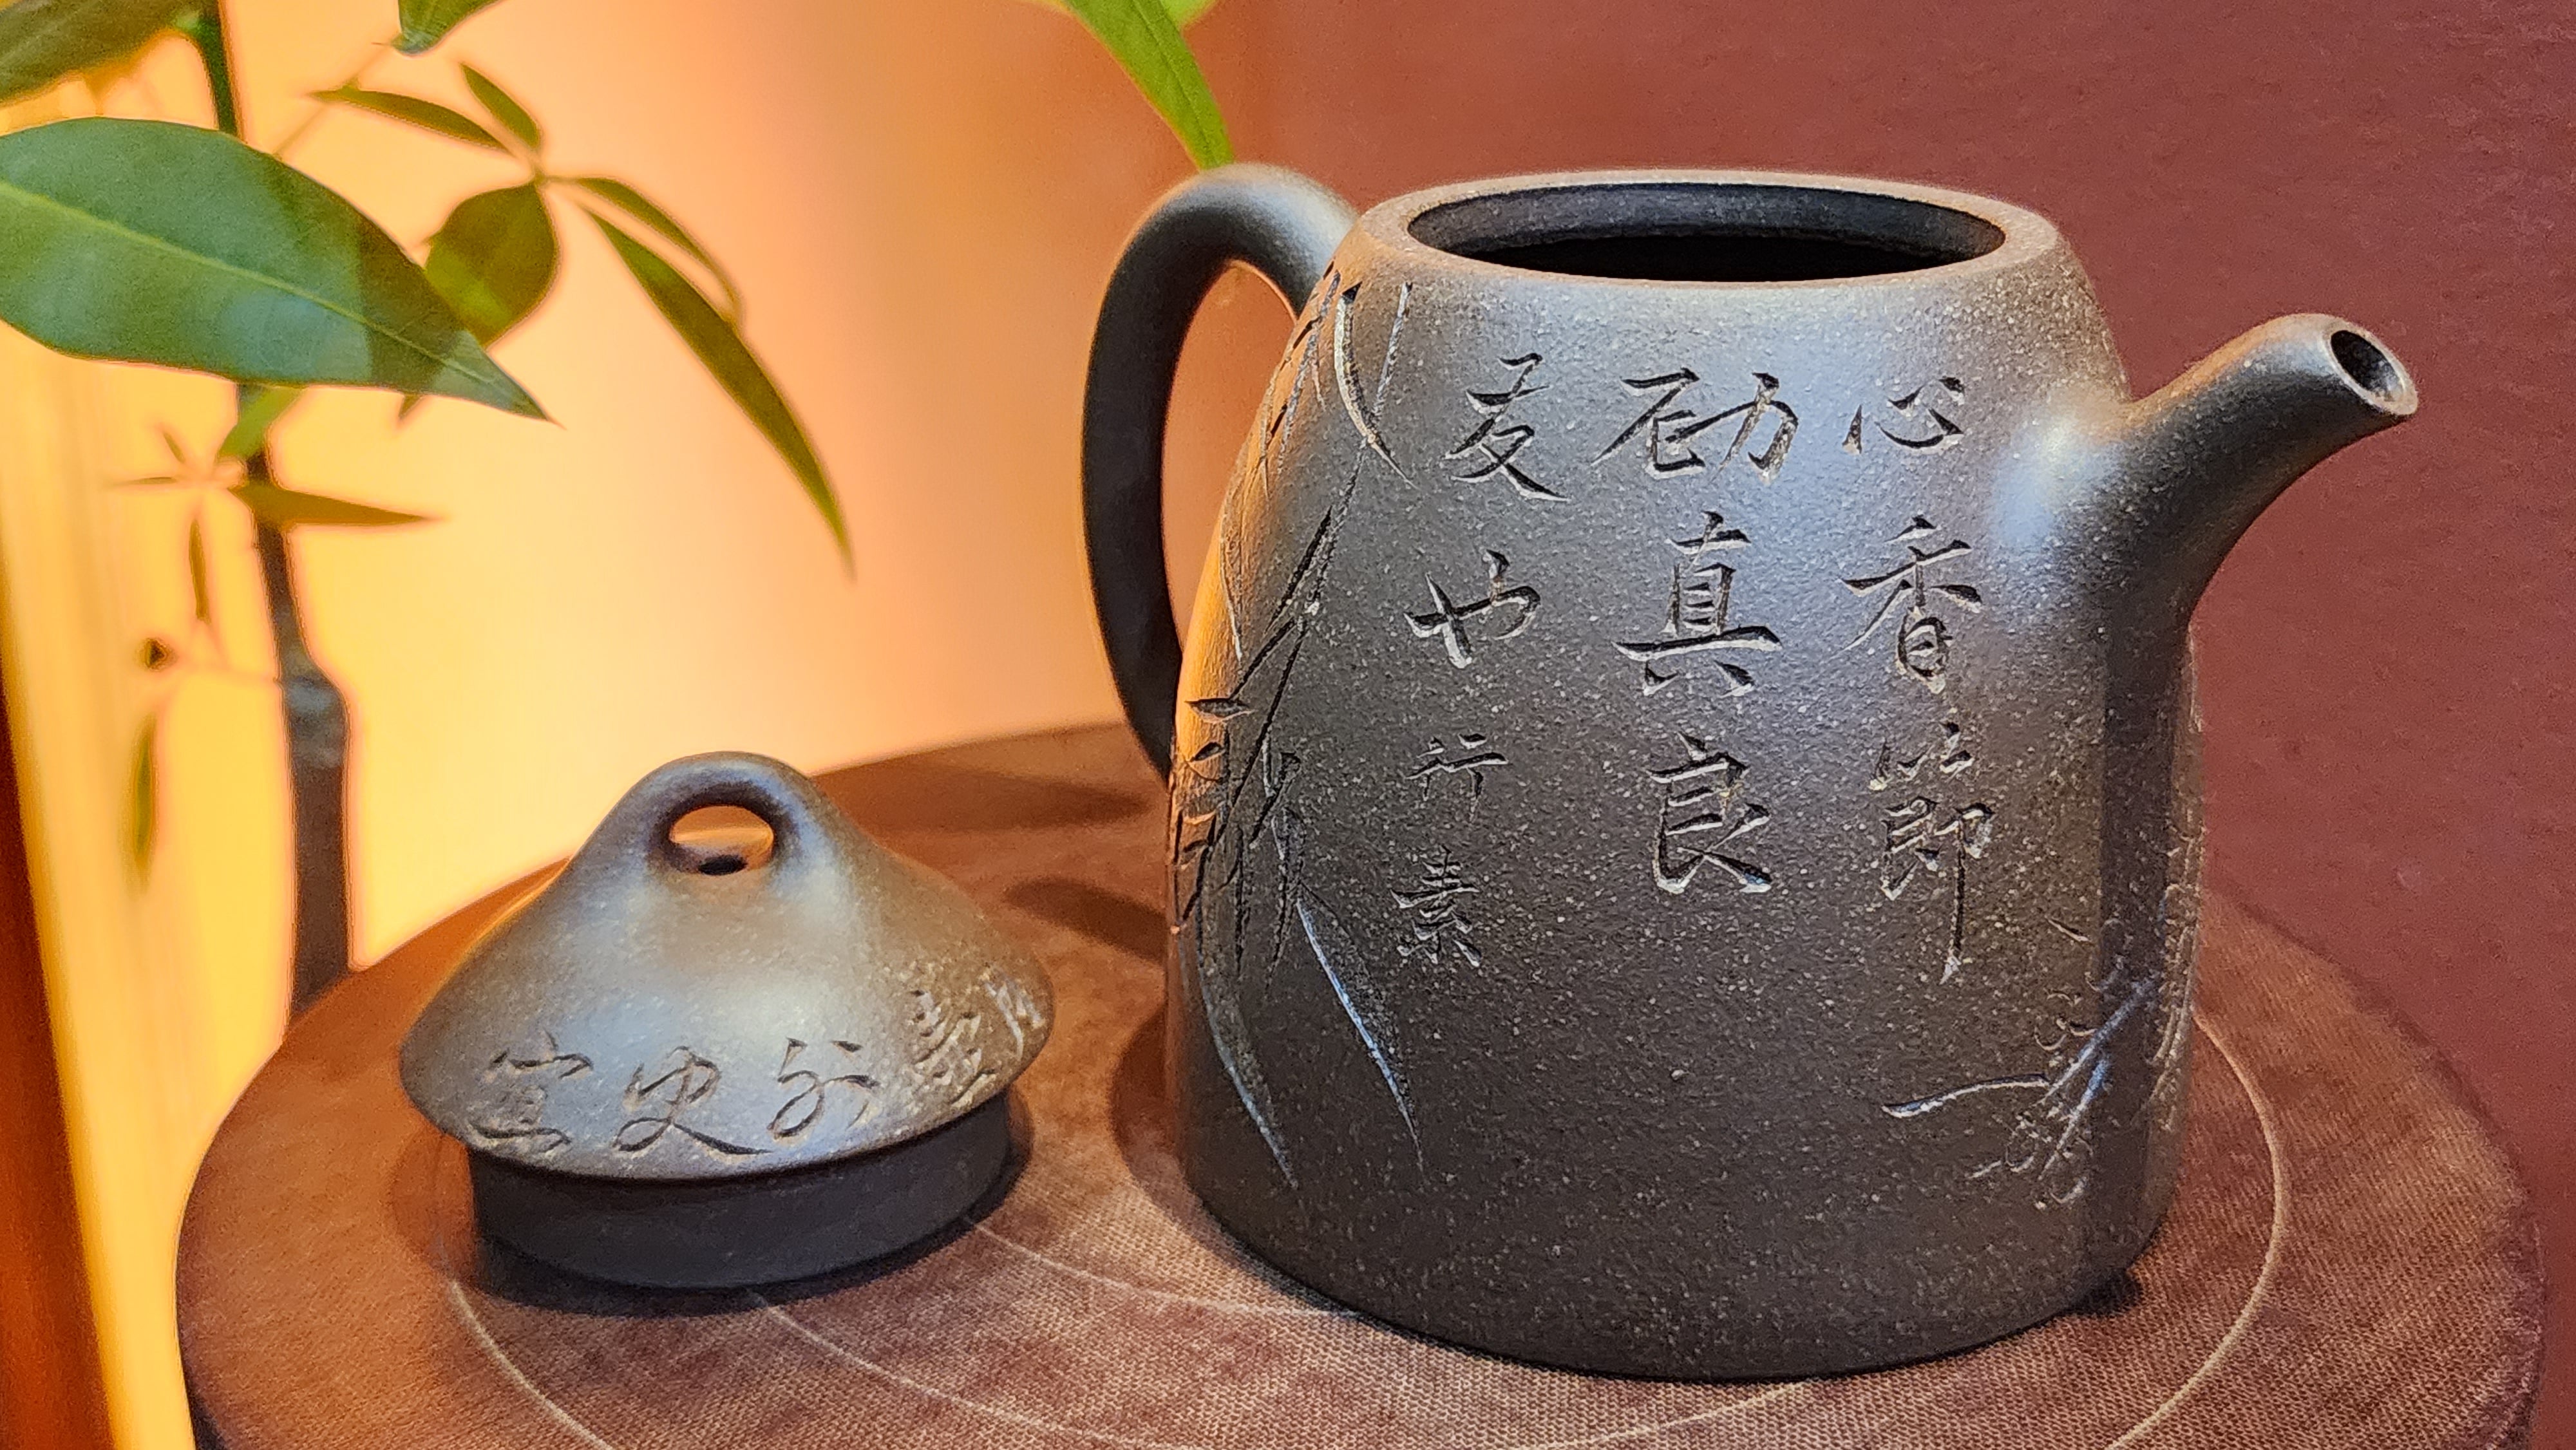 Qin Quan 秦权, 219.7ml, Duan Ni 段泥 by our collaborative Craftsman Zhao Zhi Dong 赵志东, with Engraving of Plum Blossoms 梅花and Calligraphy by L4 Assoc Master Xing Su 行素。